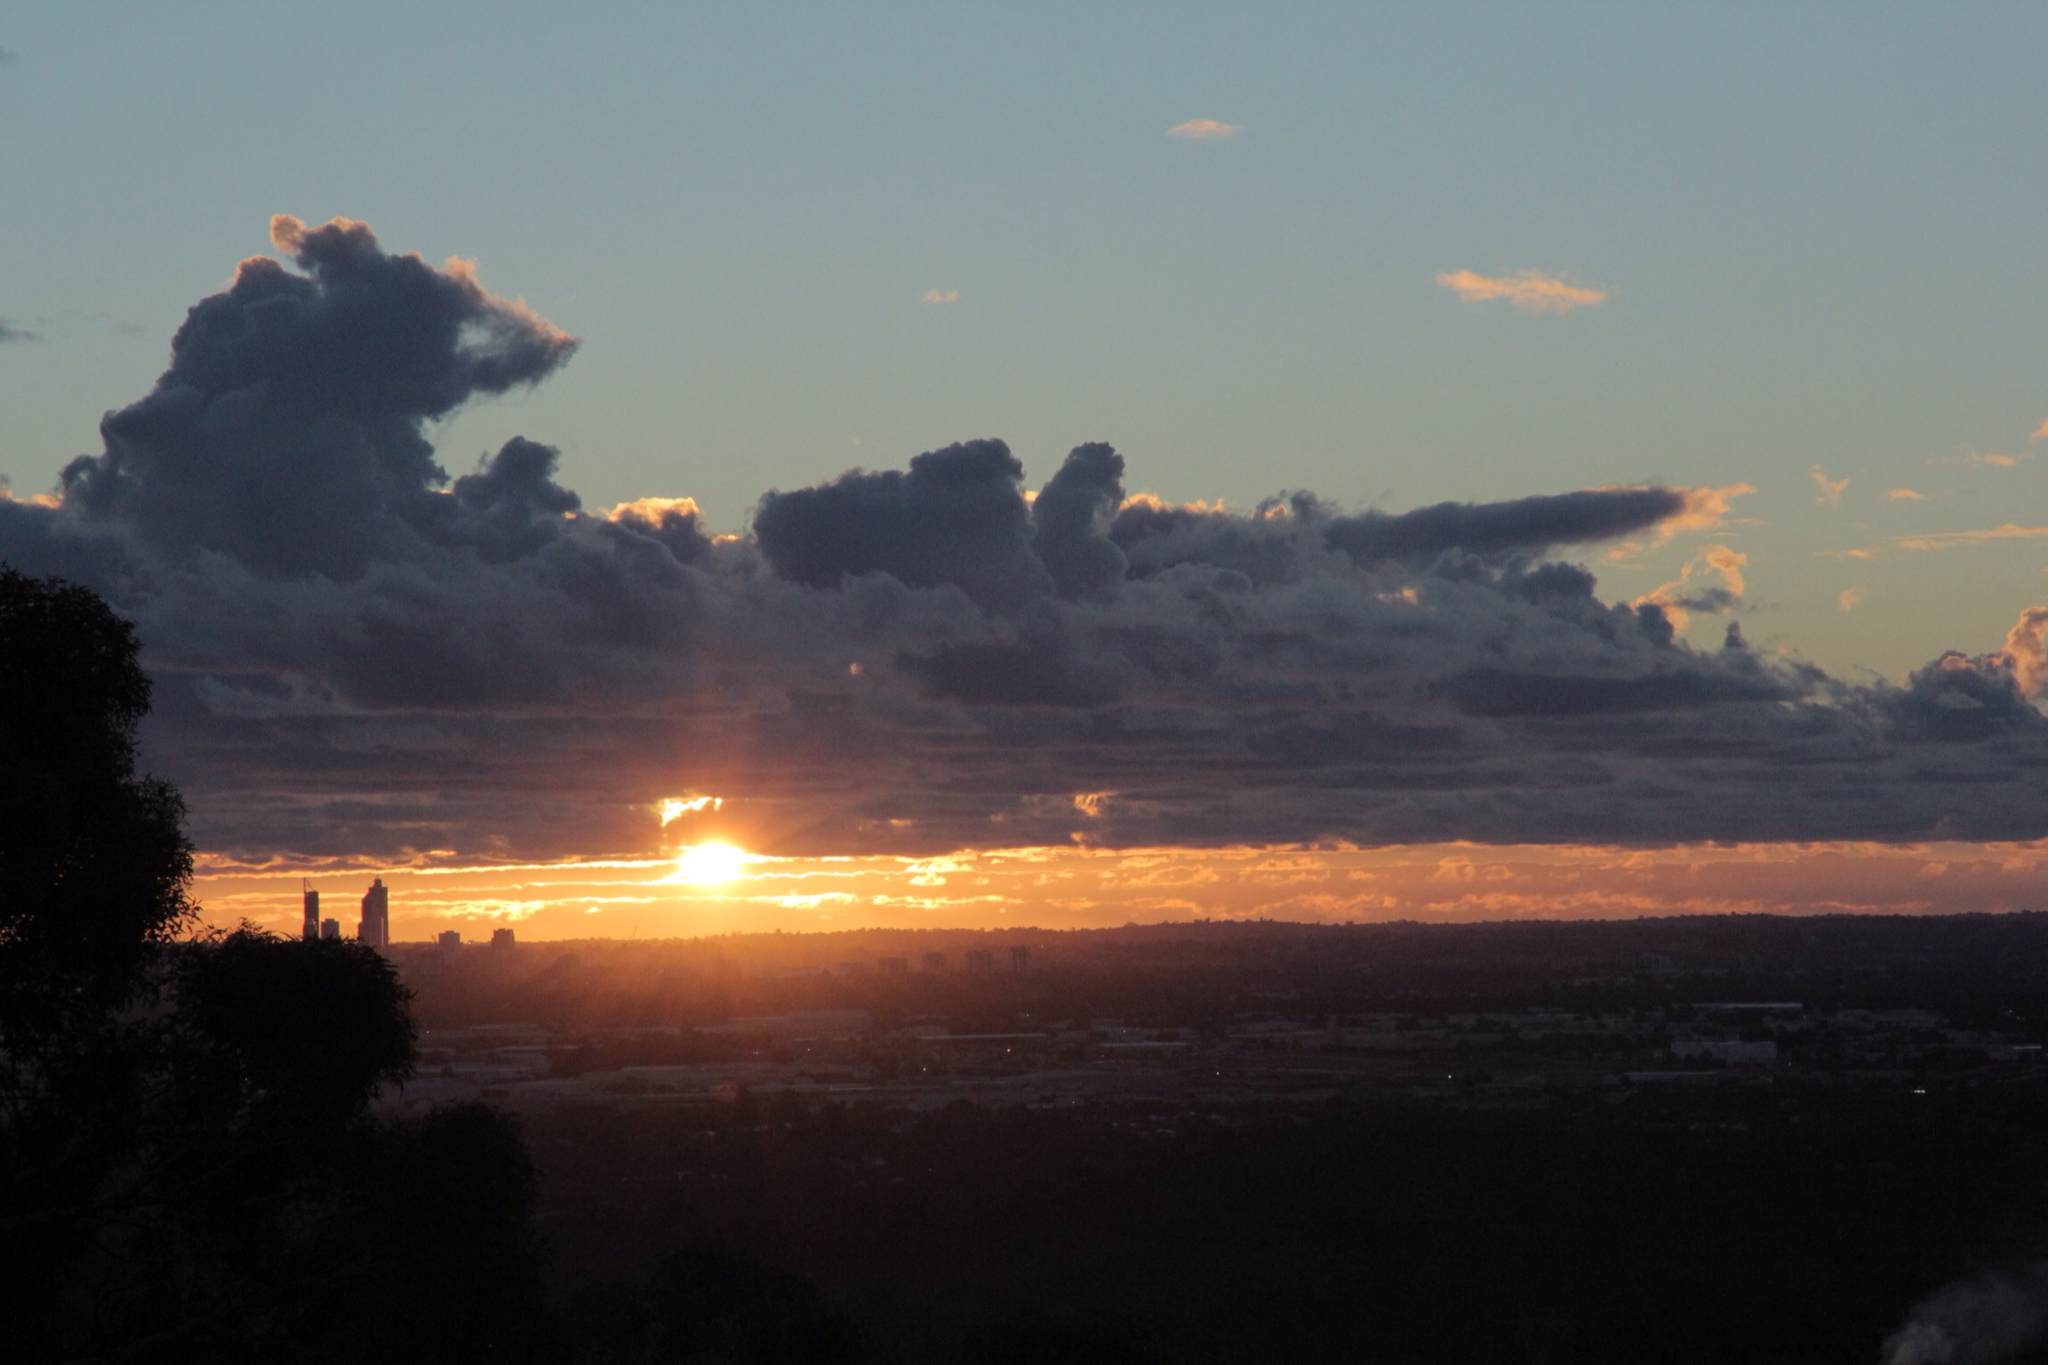 Sunset over Perth